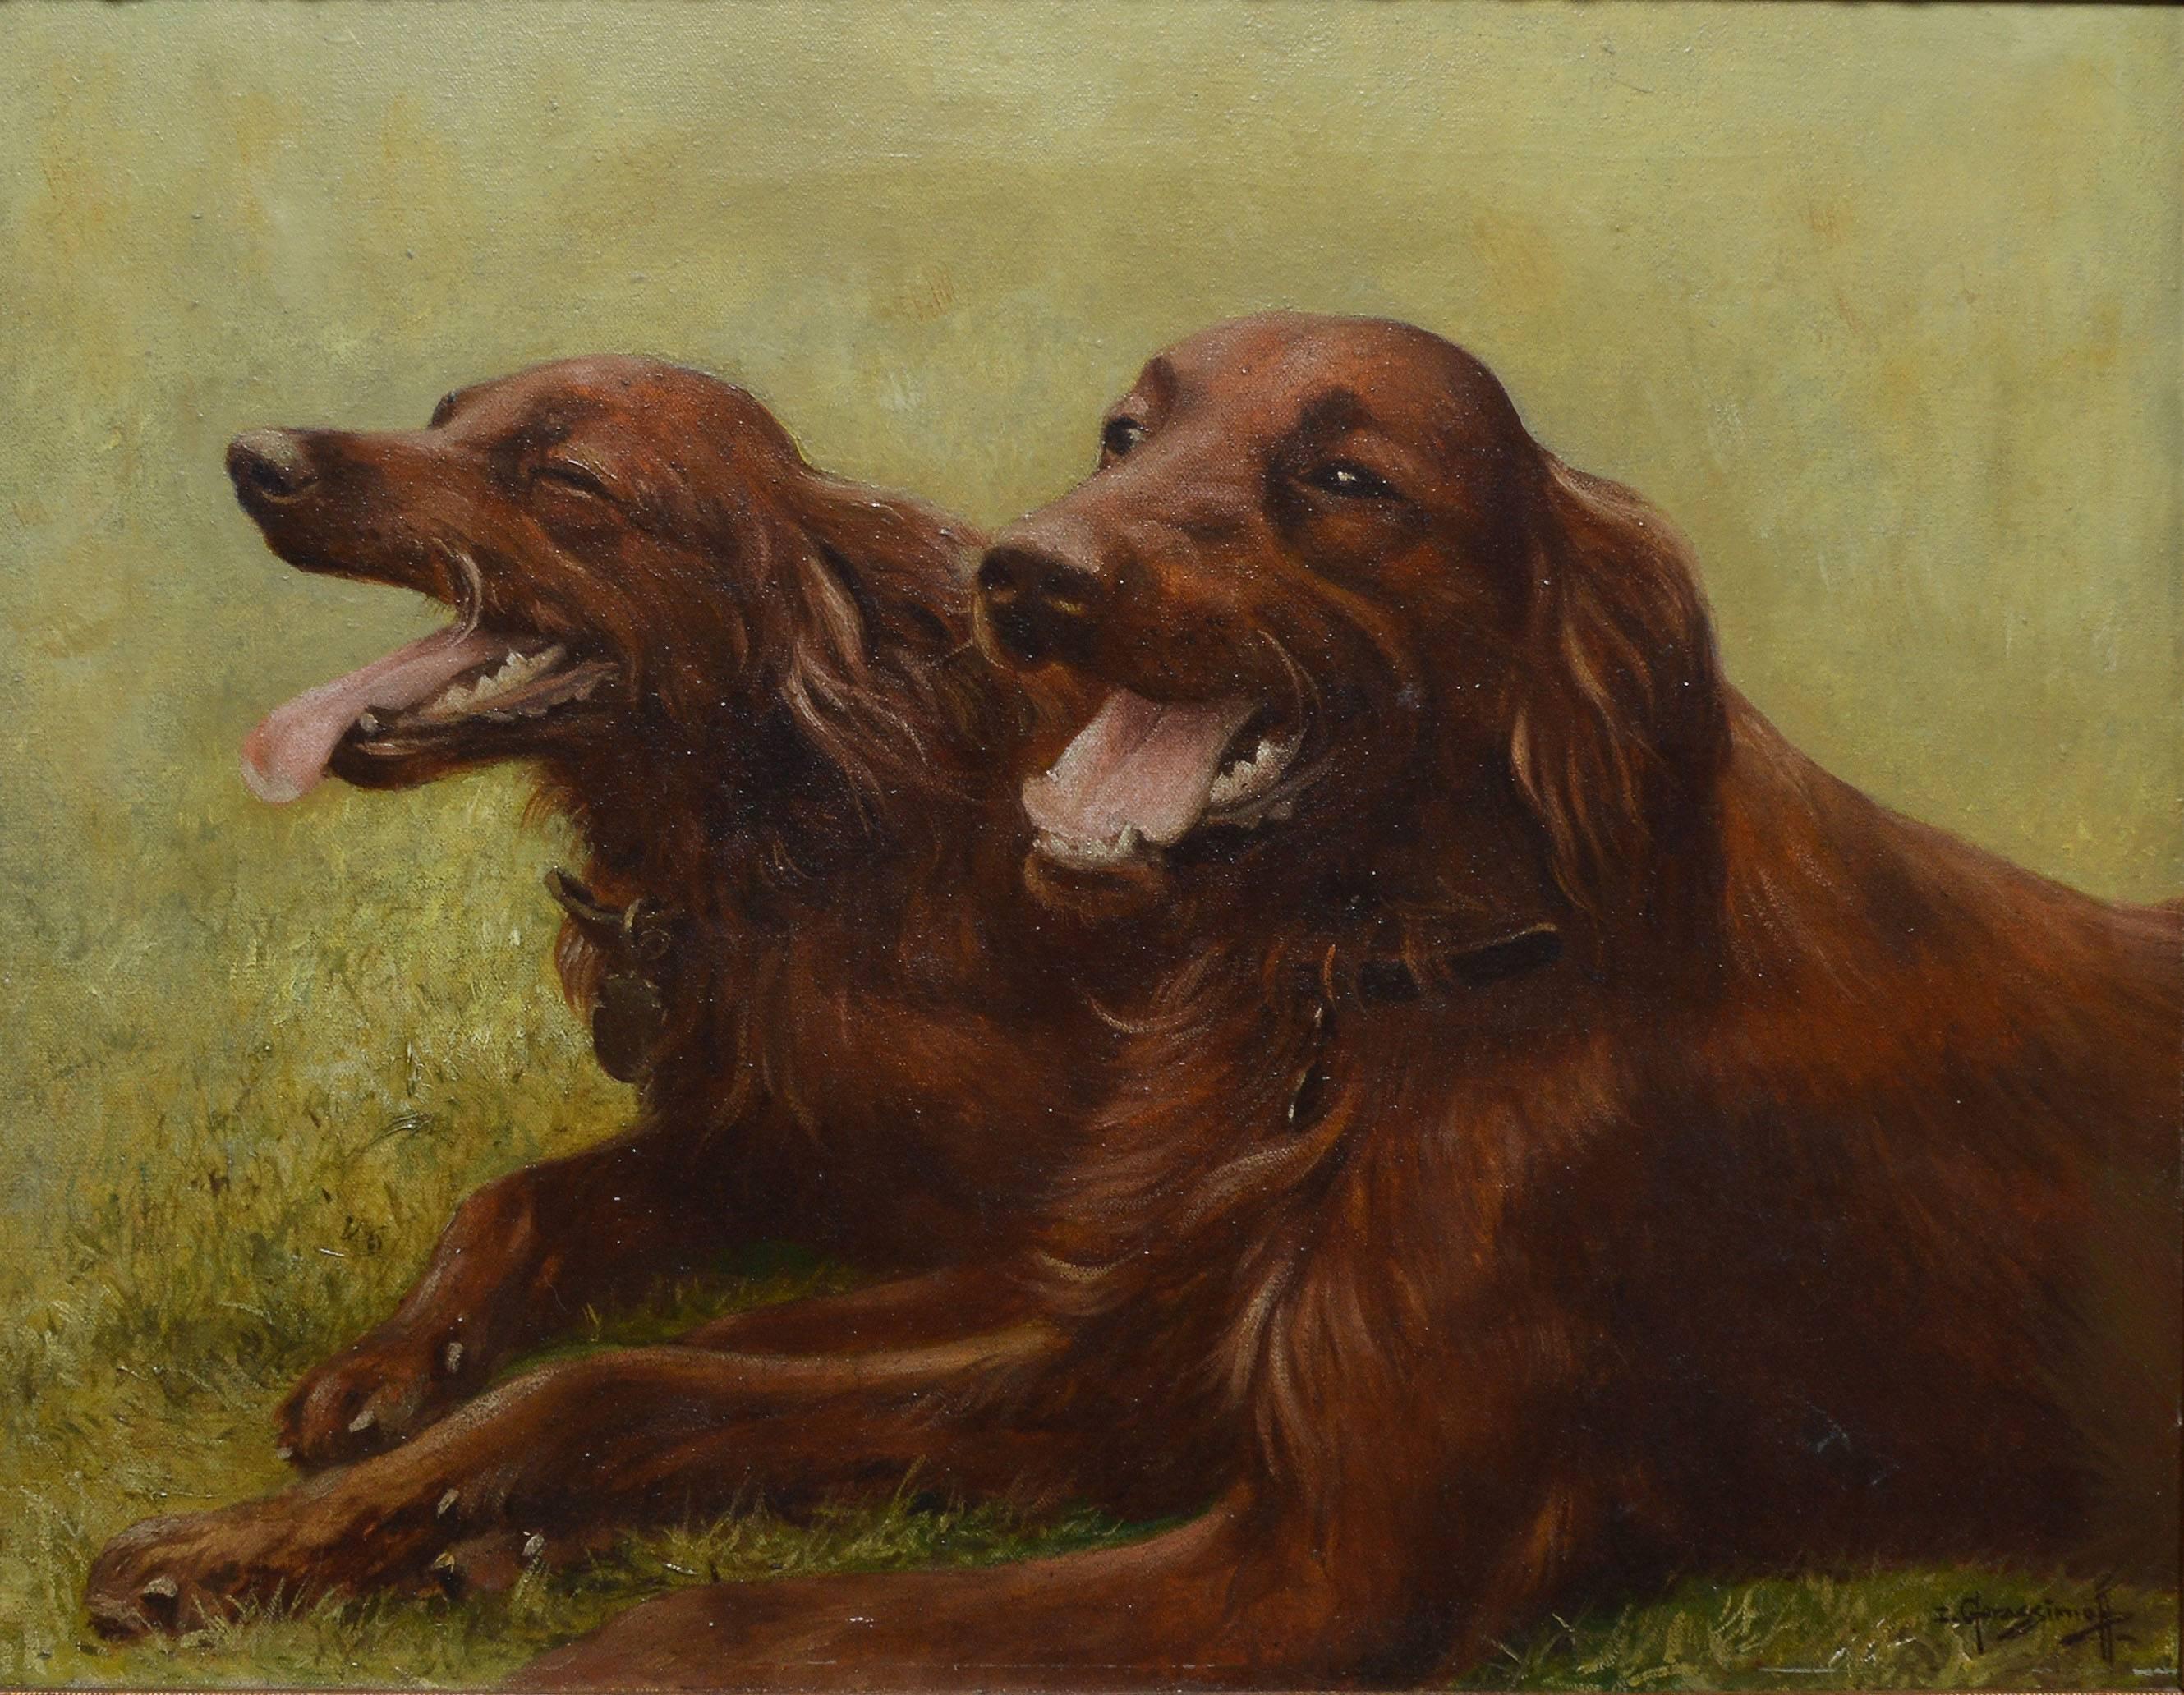 Impressionist portrait of two Irish Setter dogs by Ivan Gerasimov  (1945-1954).  Oil on canvas, circa 1940.  Signed lower right, "I. Gerassimoff".  Displayed in an antique frame.  Image size 20"L x 16"H, overall 28"L x